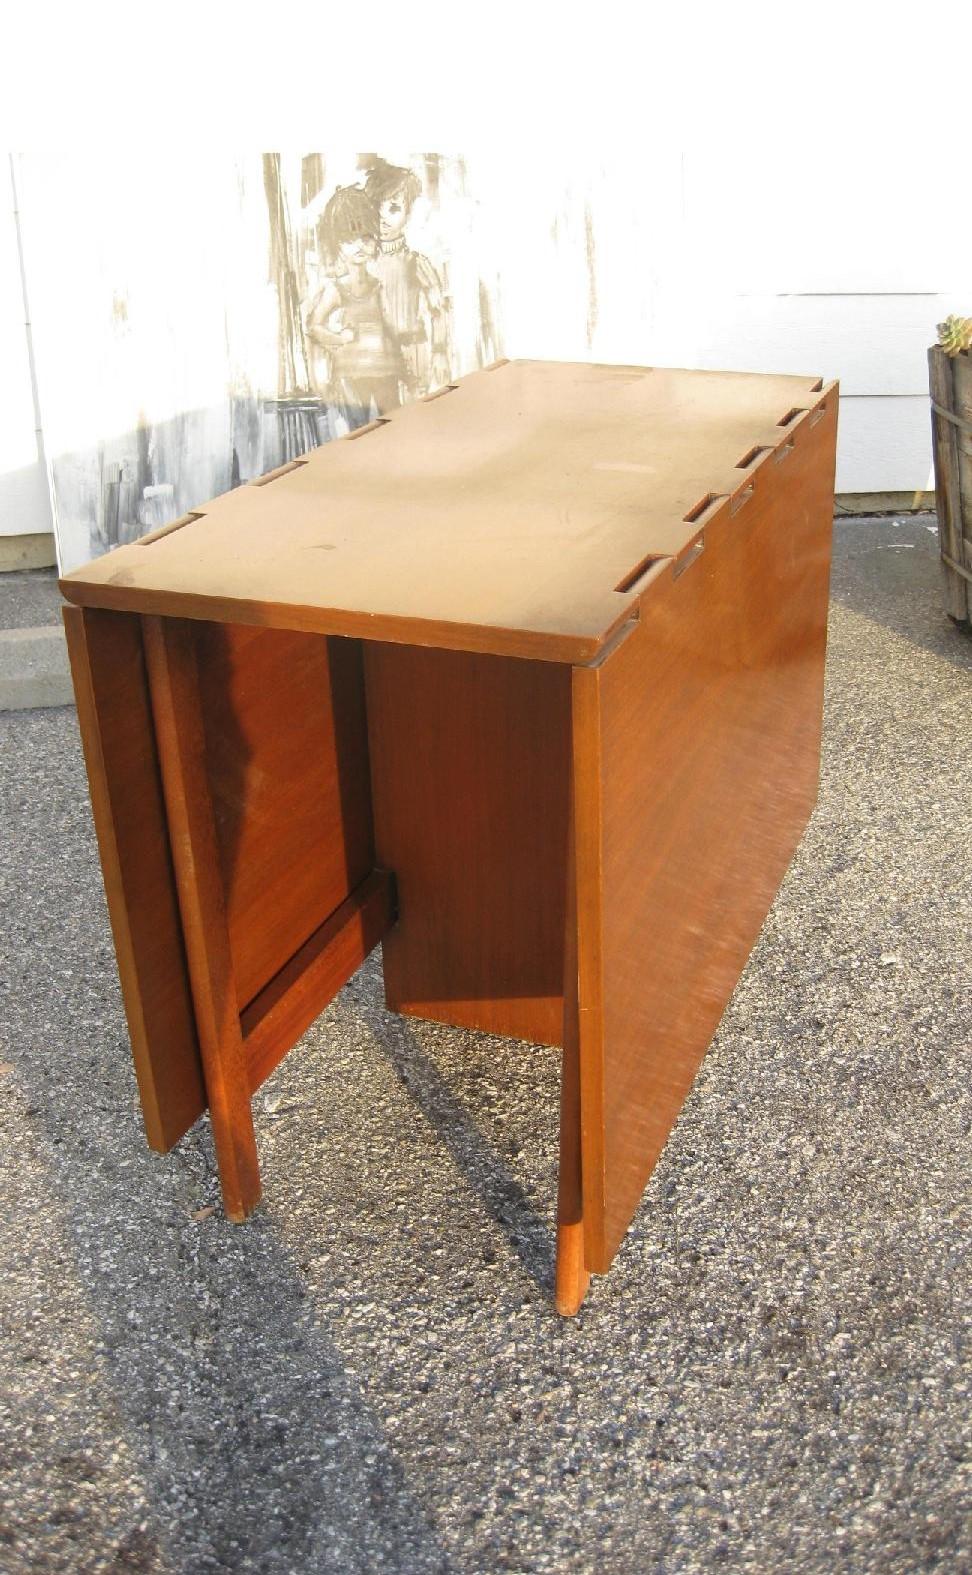 1950s Mid Century George Nelson for Herman Miller Gate Leg Dining Table In Good Condition For Sale In Monrovia, CA